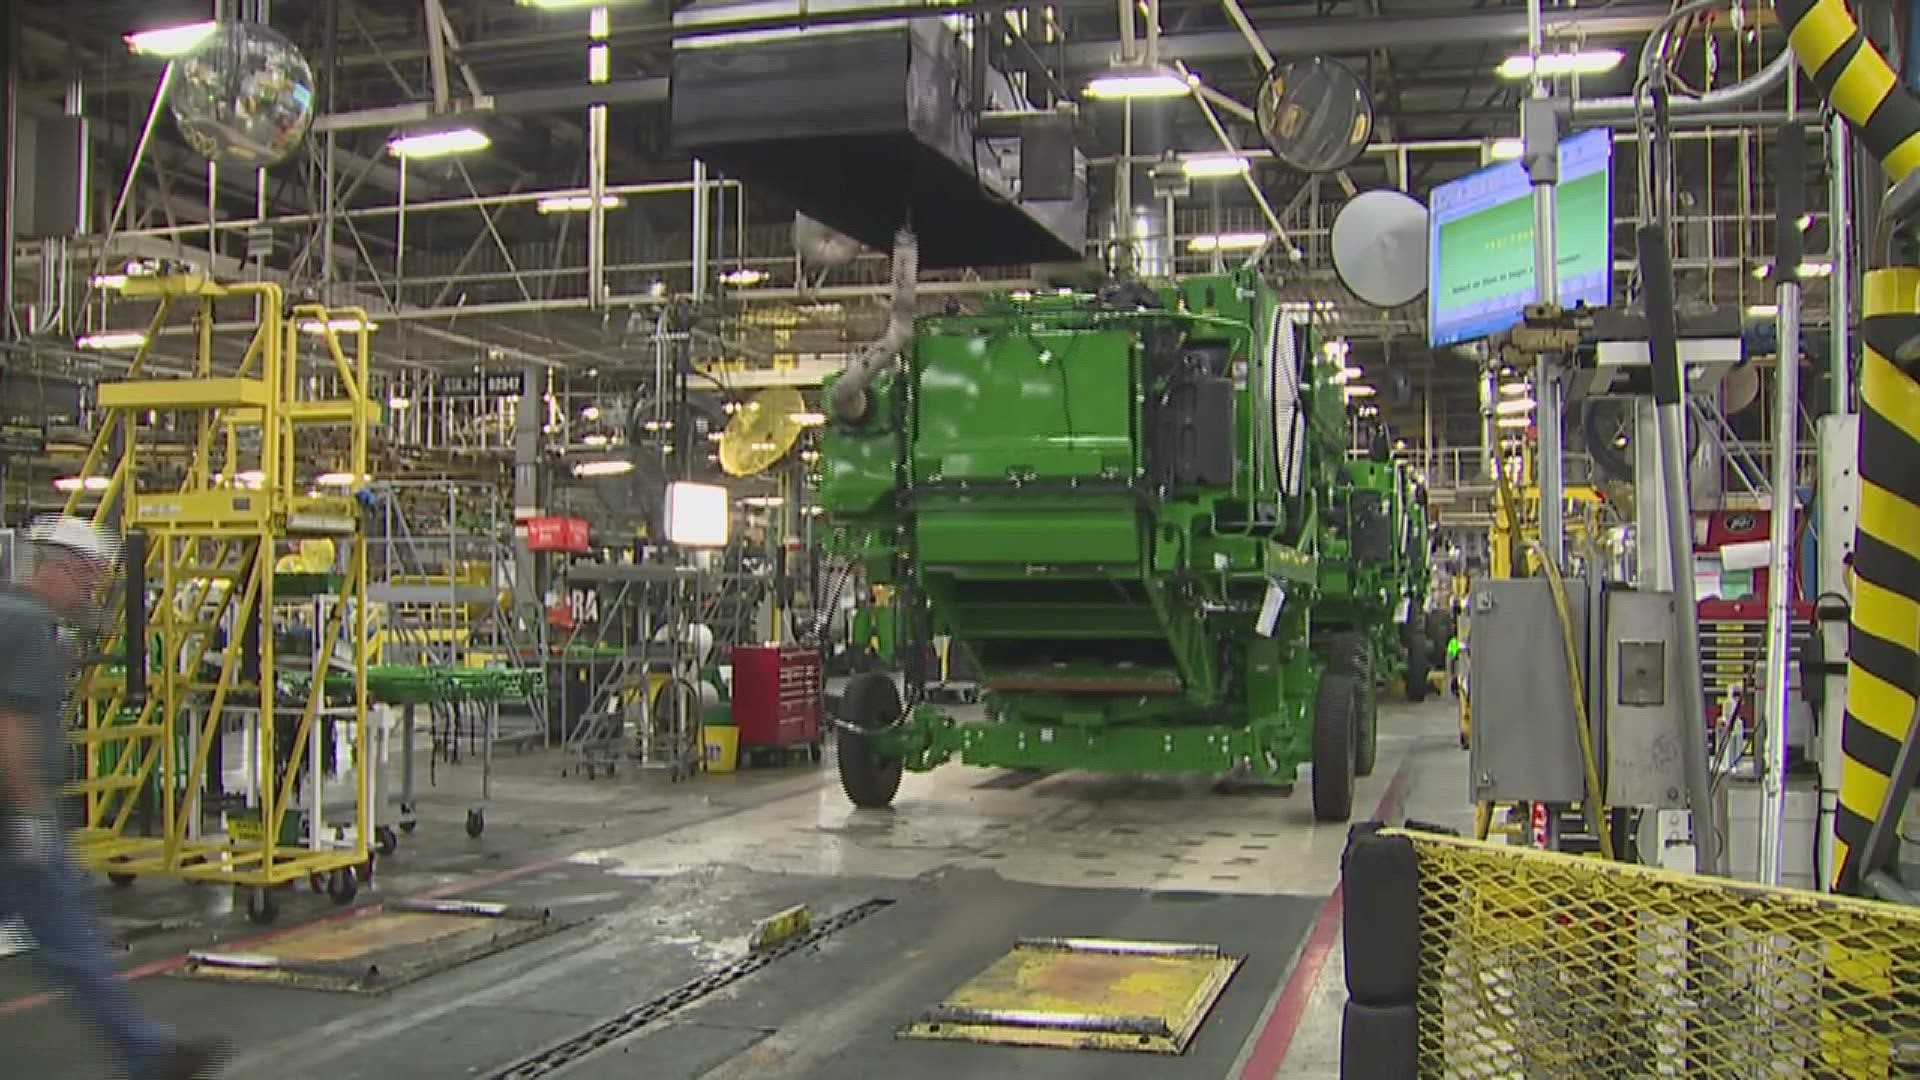 John Deere and the United Auto Workers Union continue to negotiate a new contract ahead of a Wednesday night strike deadline, after 90% of union workers voted no.